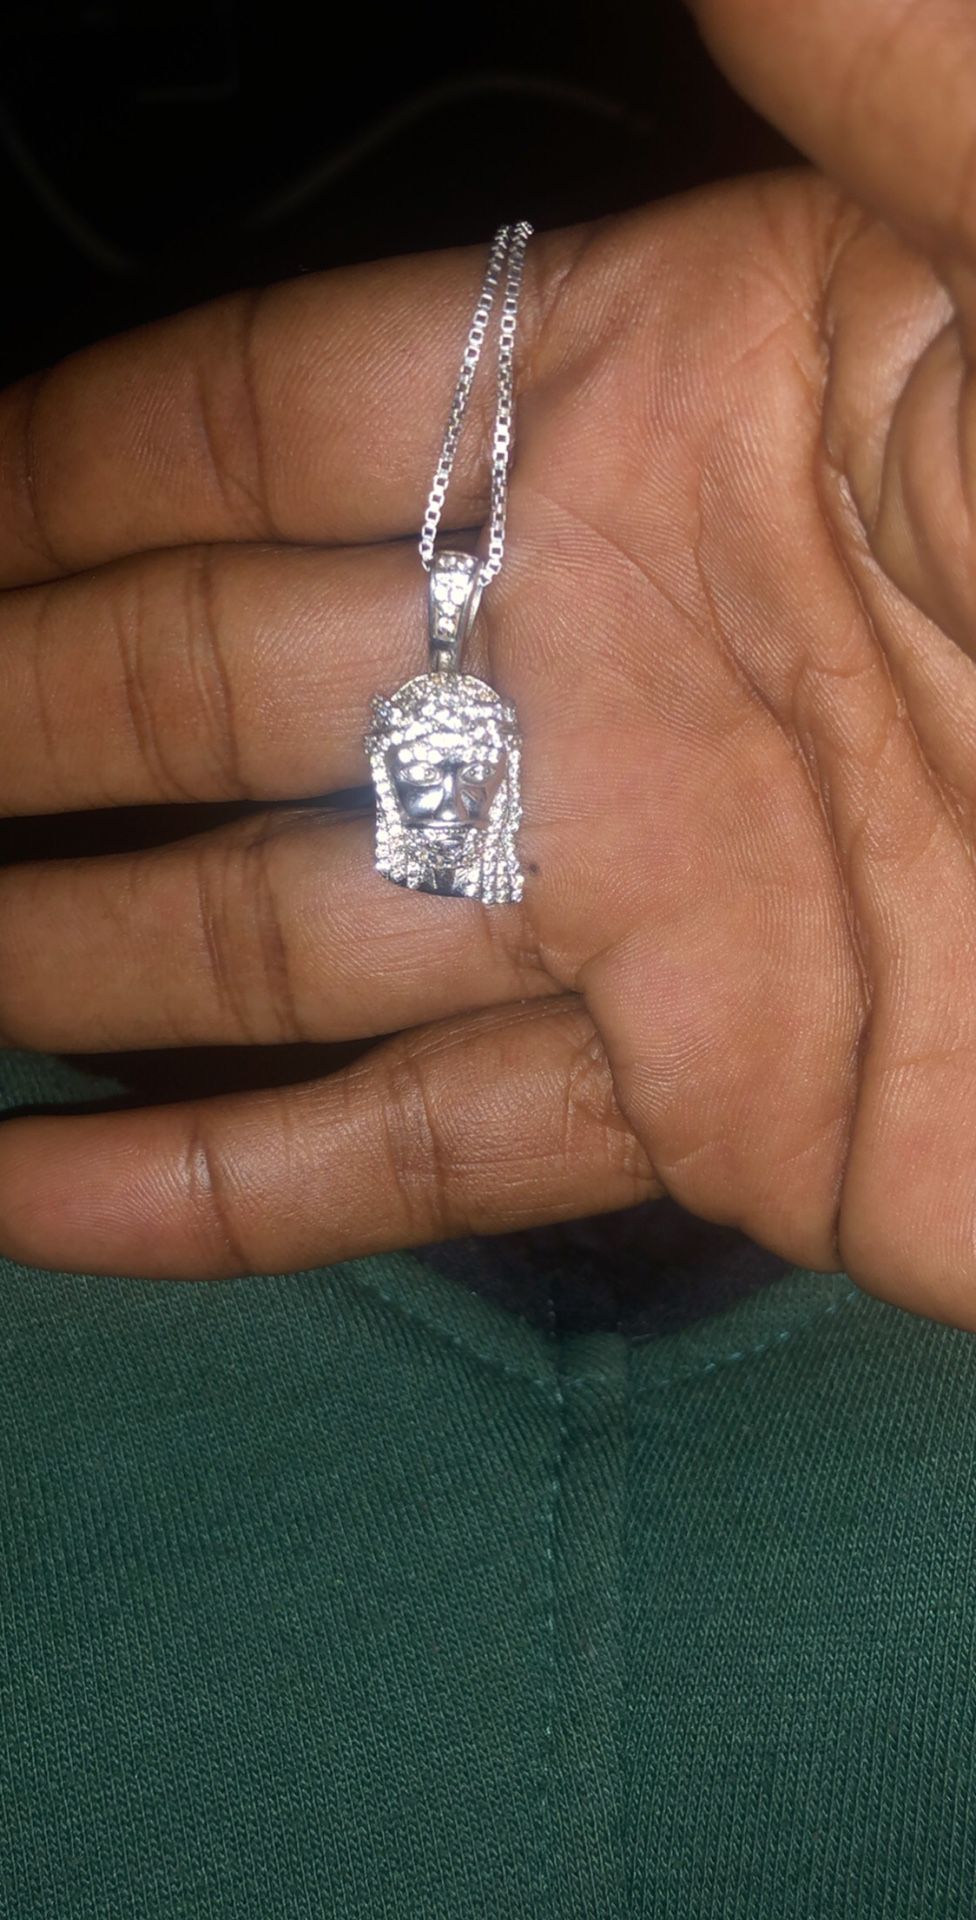 925 silver chain with GND 925 Jesus piece diamonds real. Paid $100 askin $75 obo